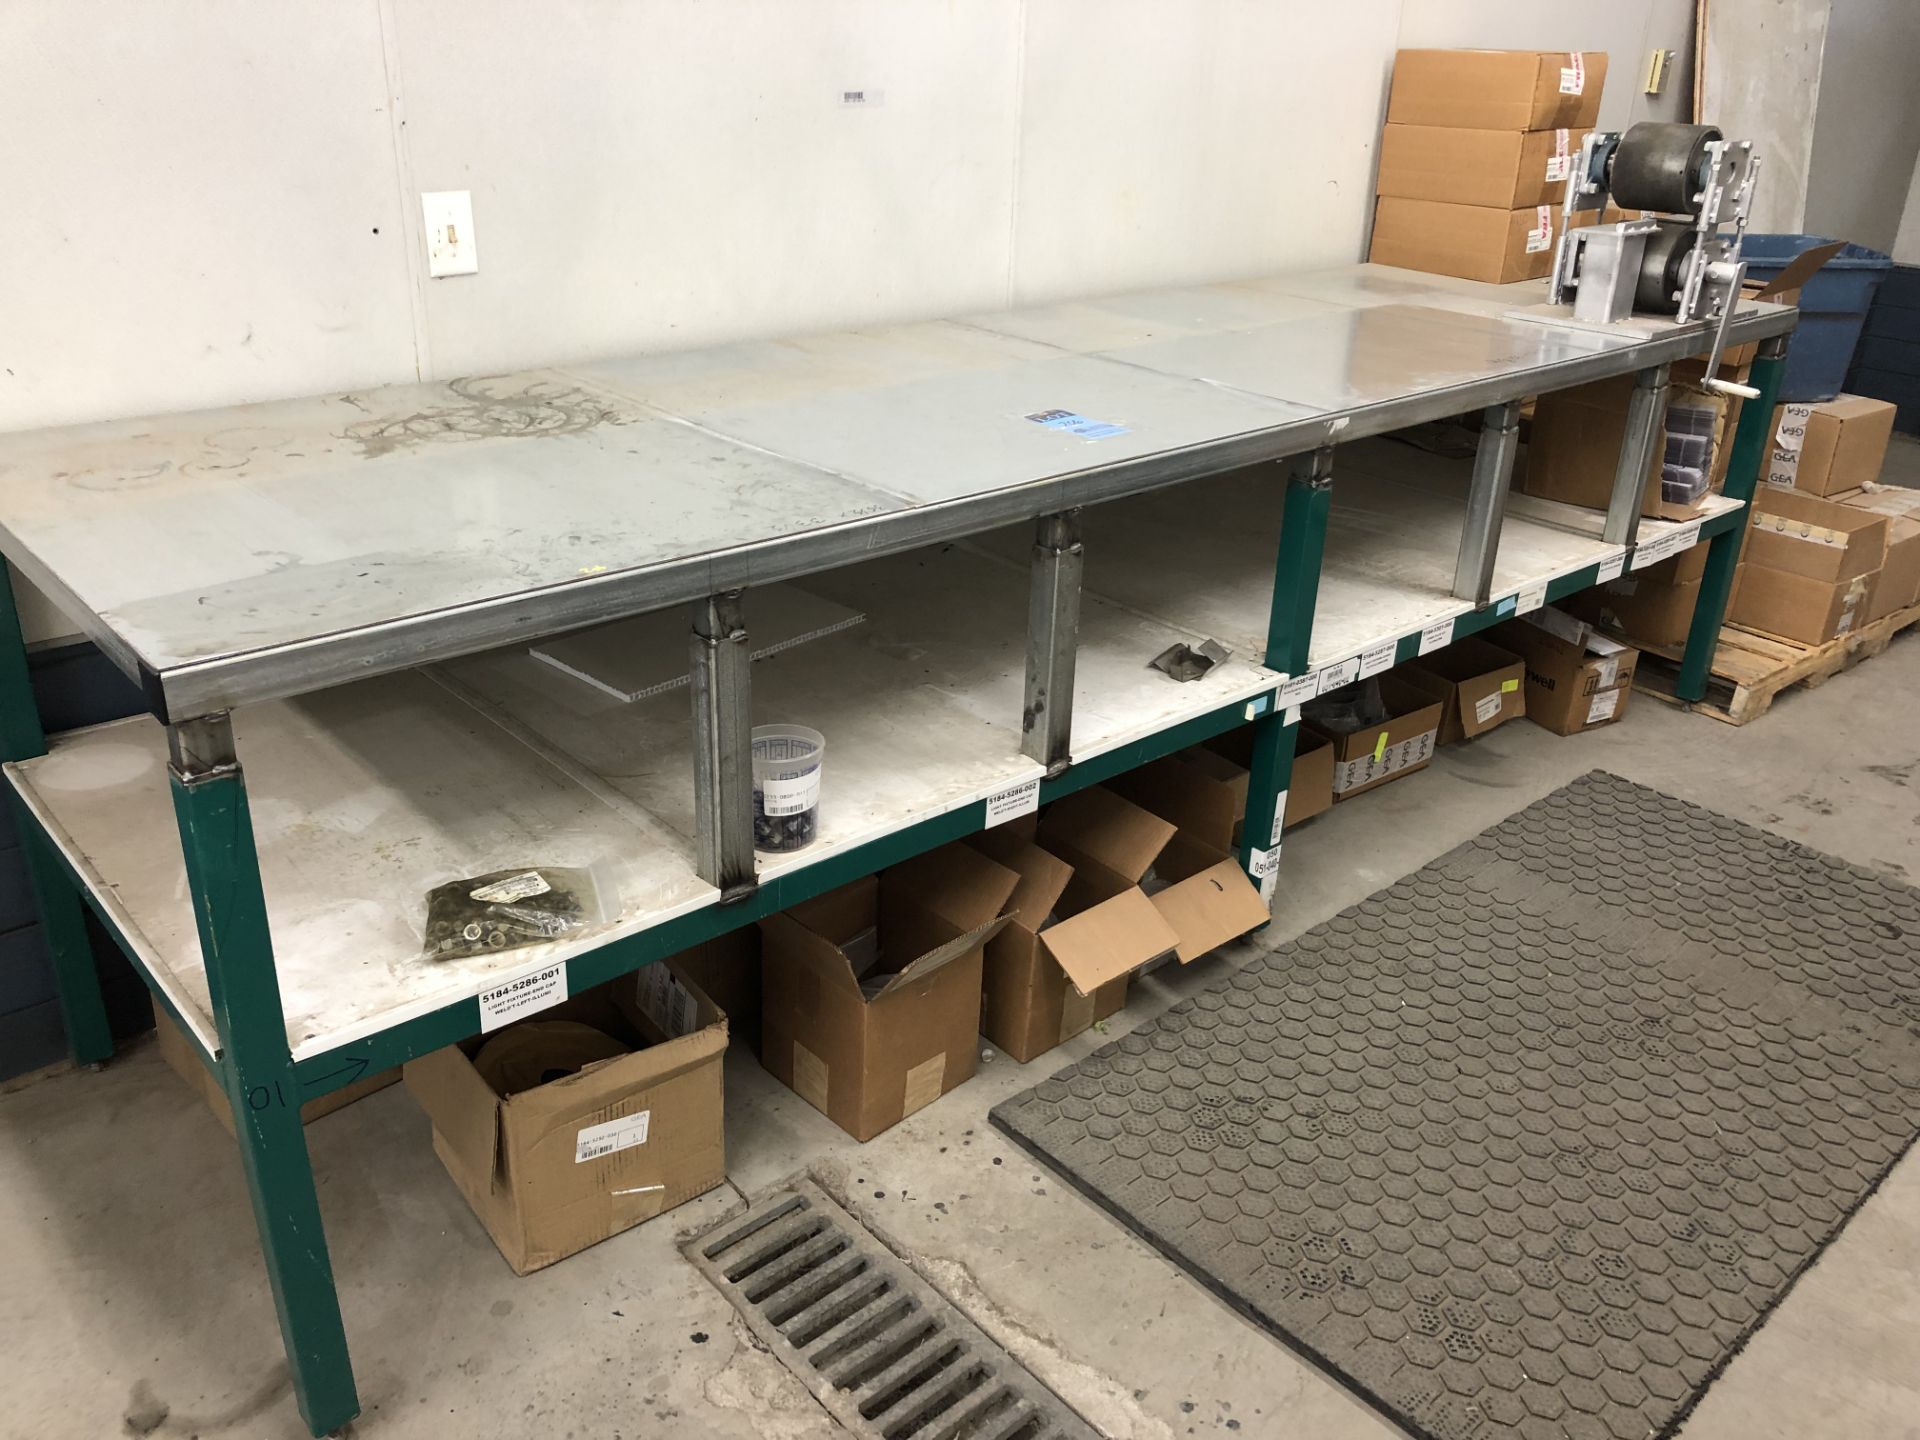 120" X 36" STEEL BENCHES ** NO RACKS ATTACHED TO WALL **